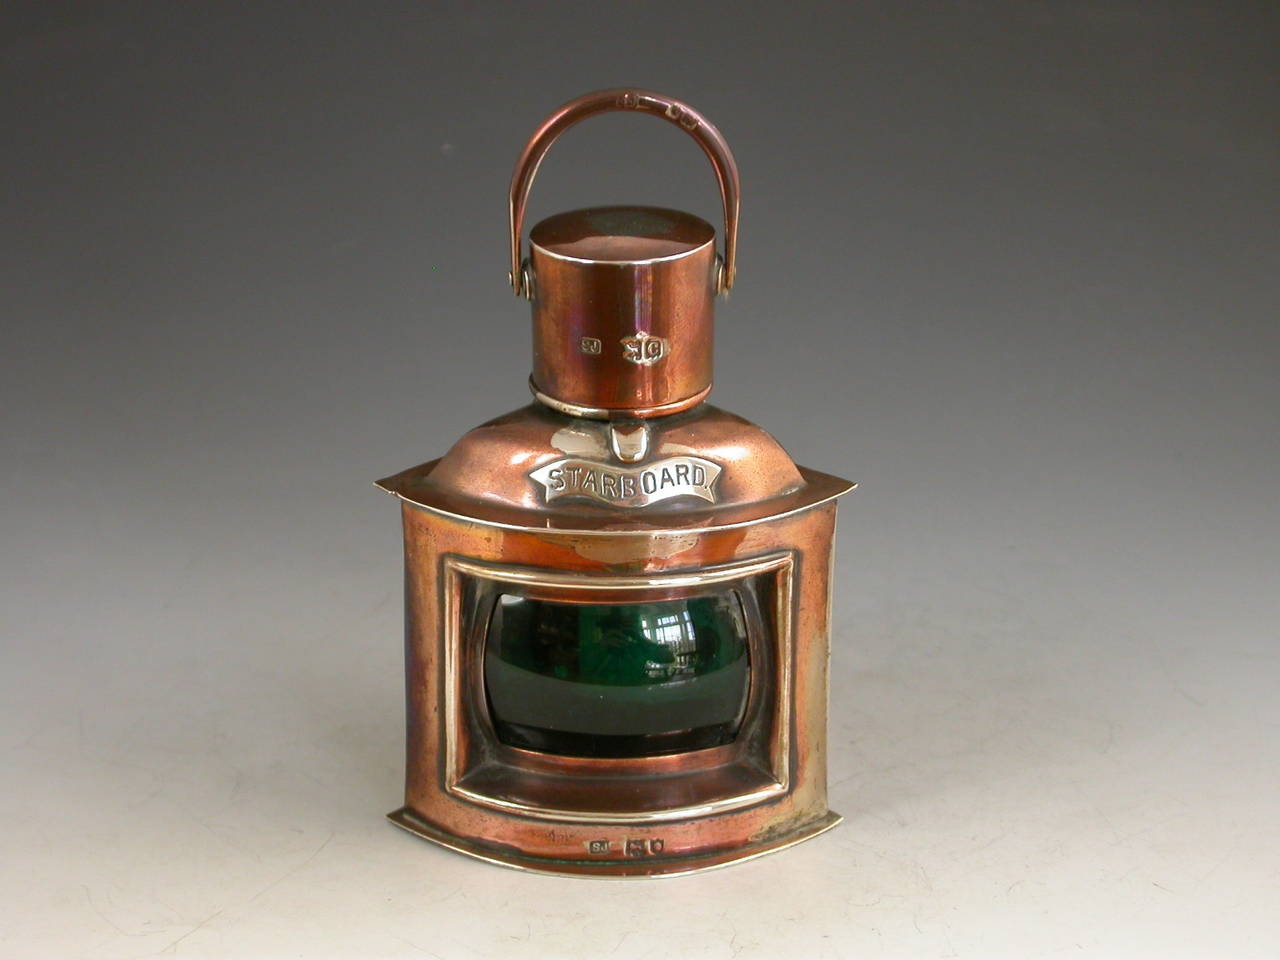 A Victorian novelty silver Cigar Table Lighter made in the form of a Ship's Starboard Lantern, with a green glass lens and hinged cover opening to reveal the removable cylindrical lighter reservoir. 

By Samuel Jacob, London, 1898